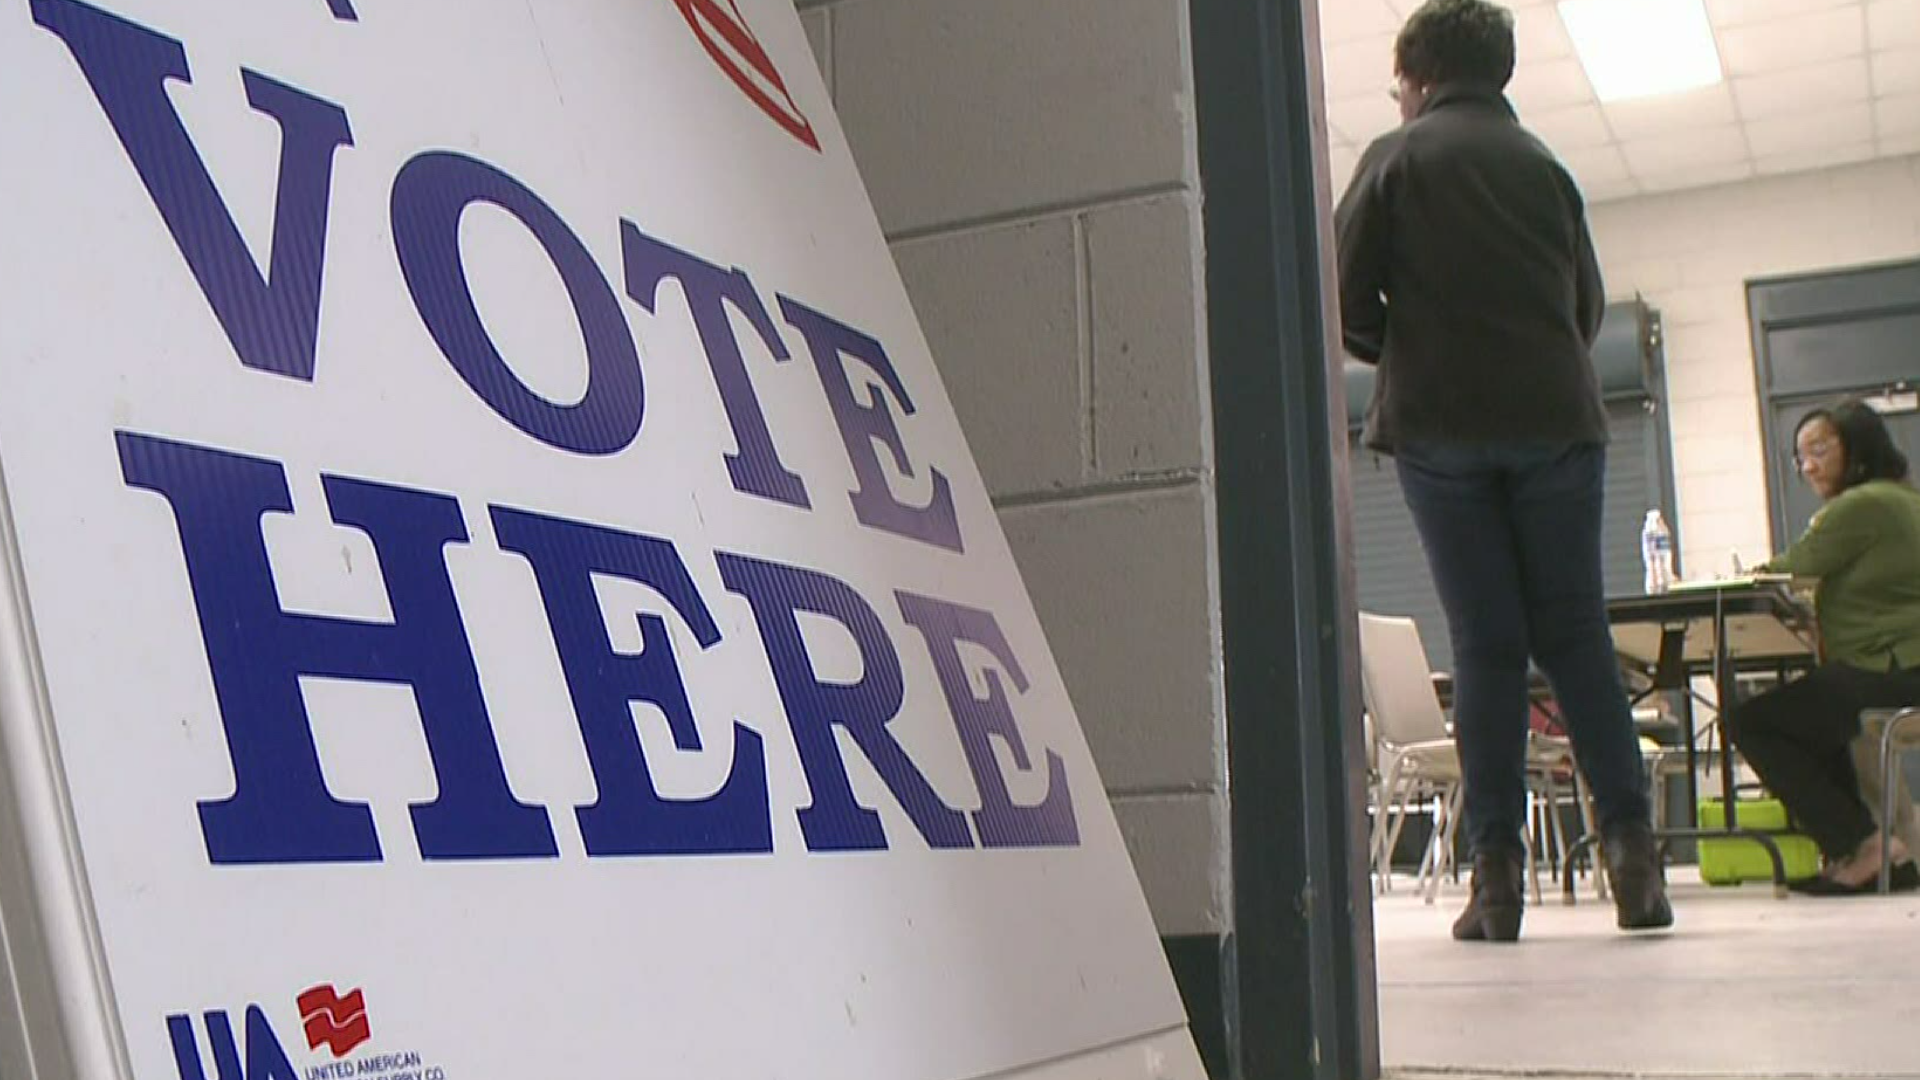 The Statewide General Primary/Presidential Preference Primary Election has been postponed until June 9, 2020, according to Secretary of State Brad Raffensperger.